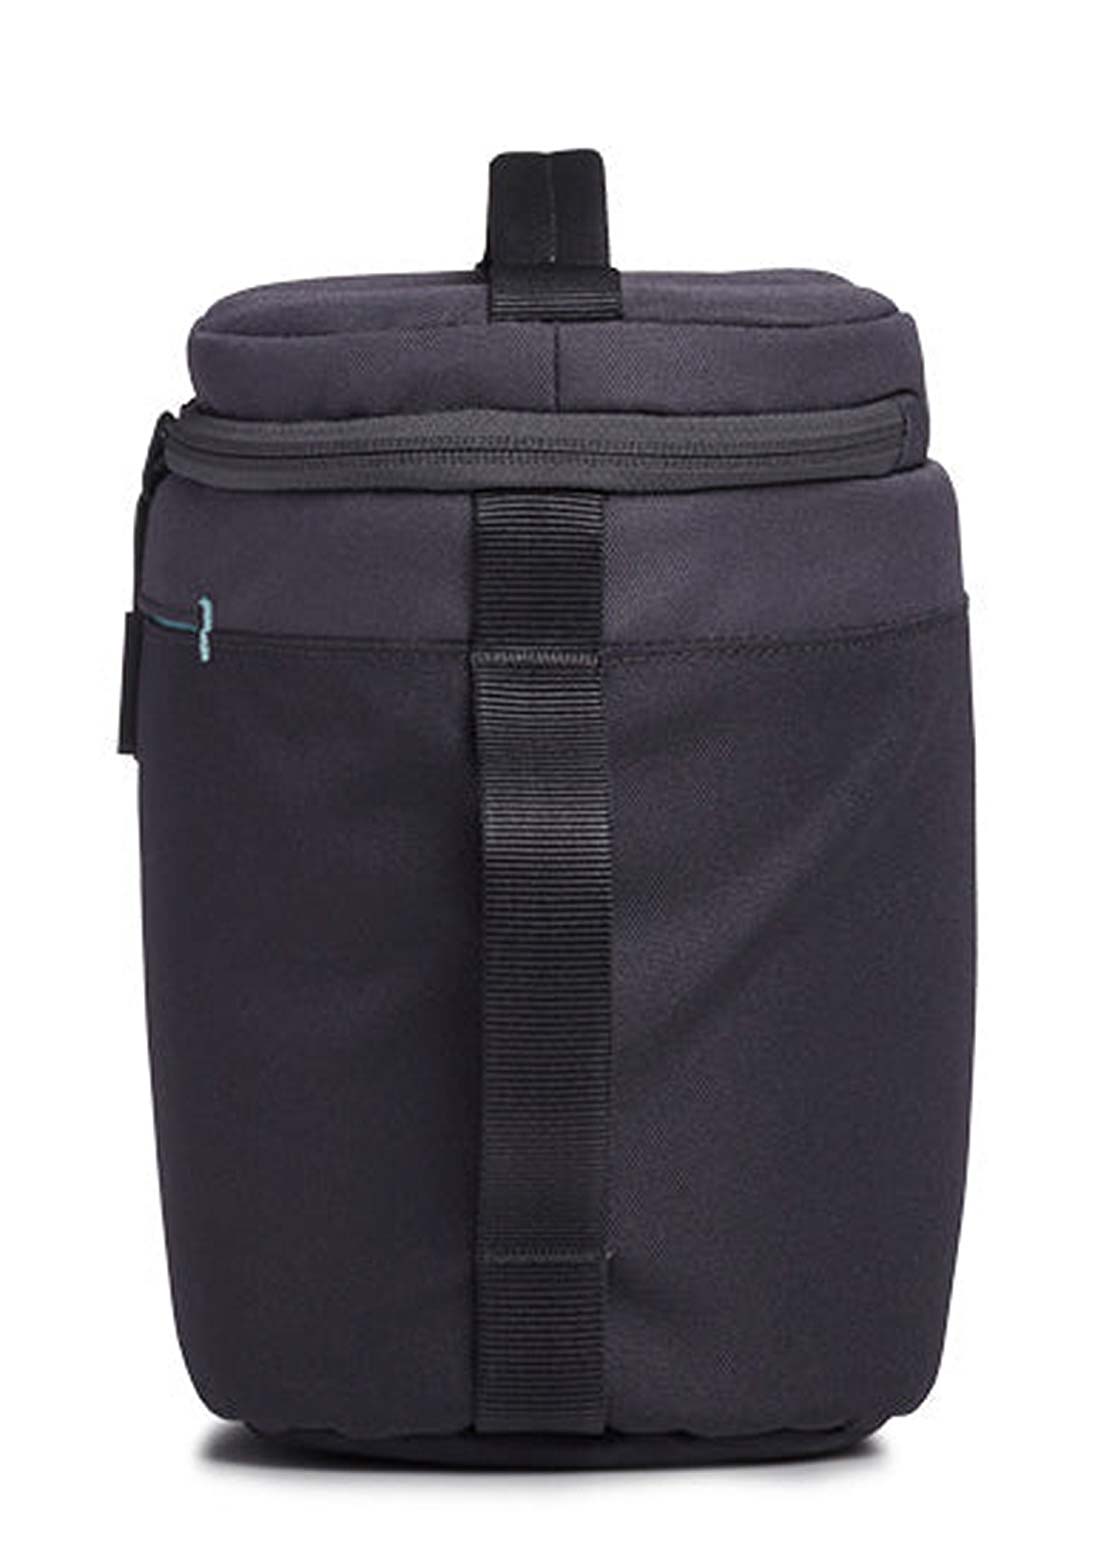 Hydro Flask 5L Insulated Lunch Bag Blackberry